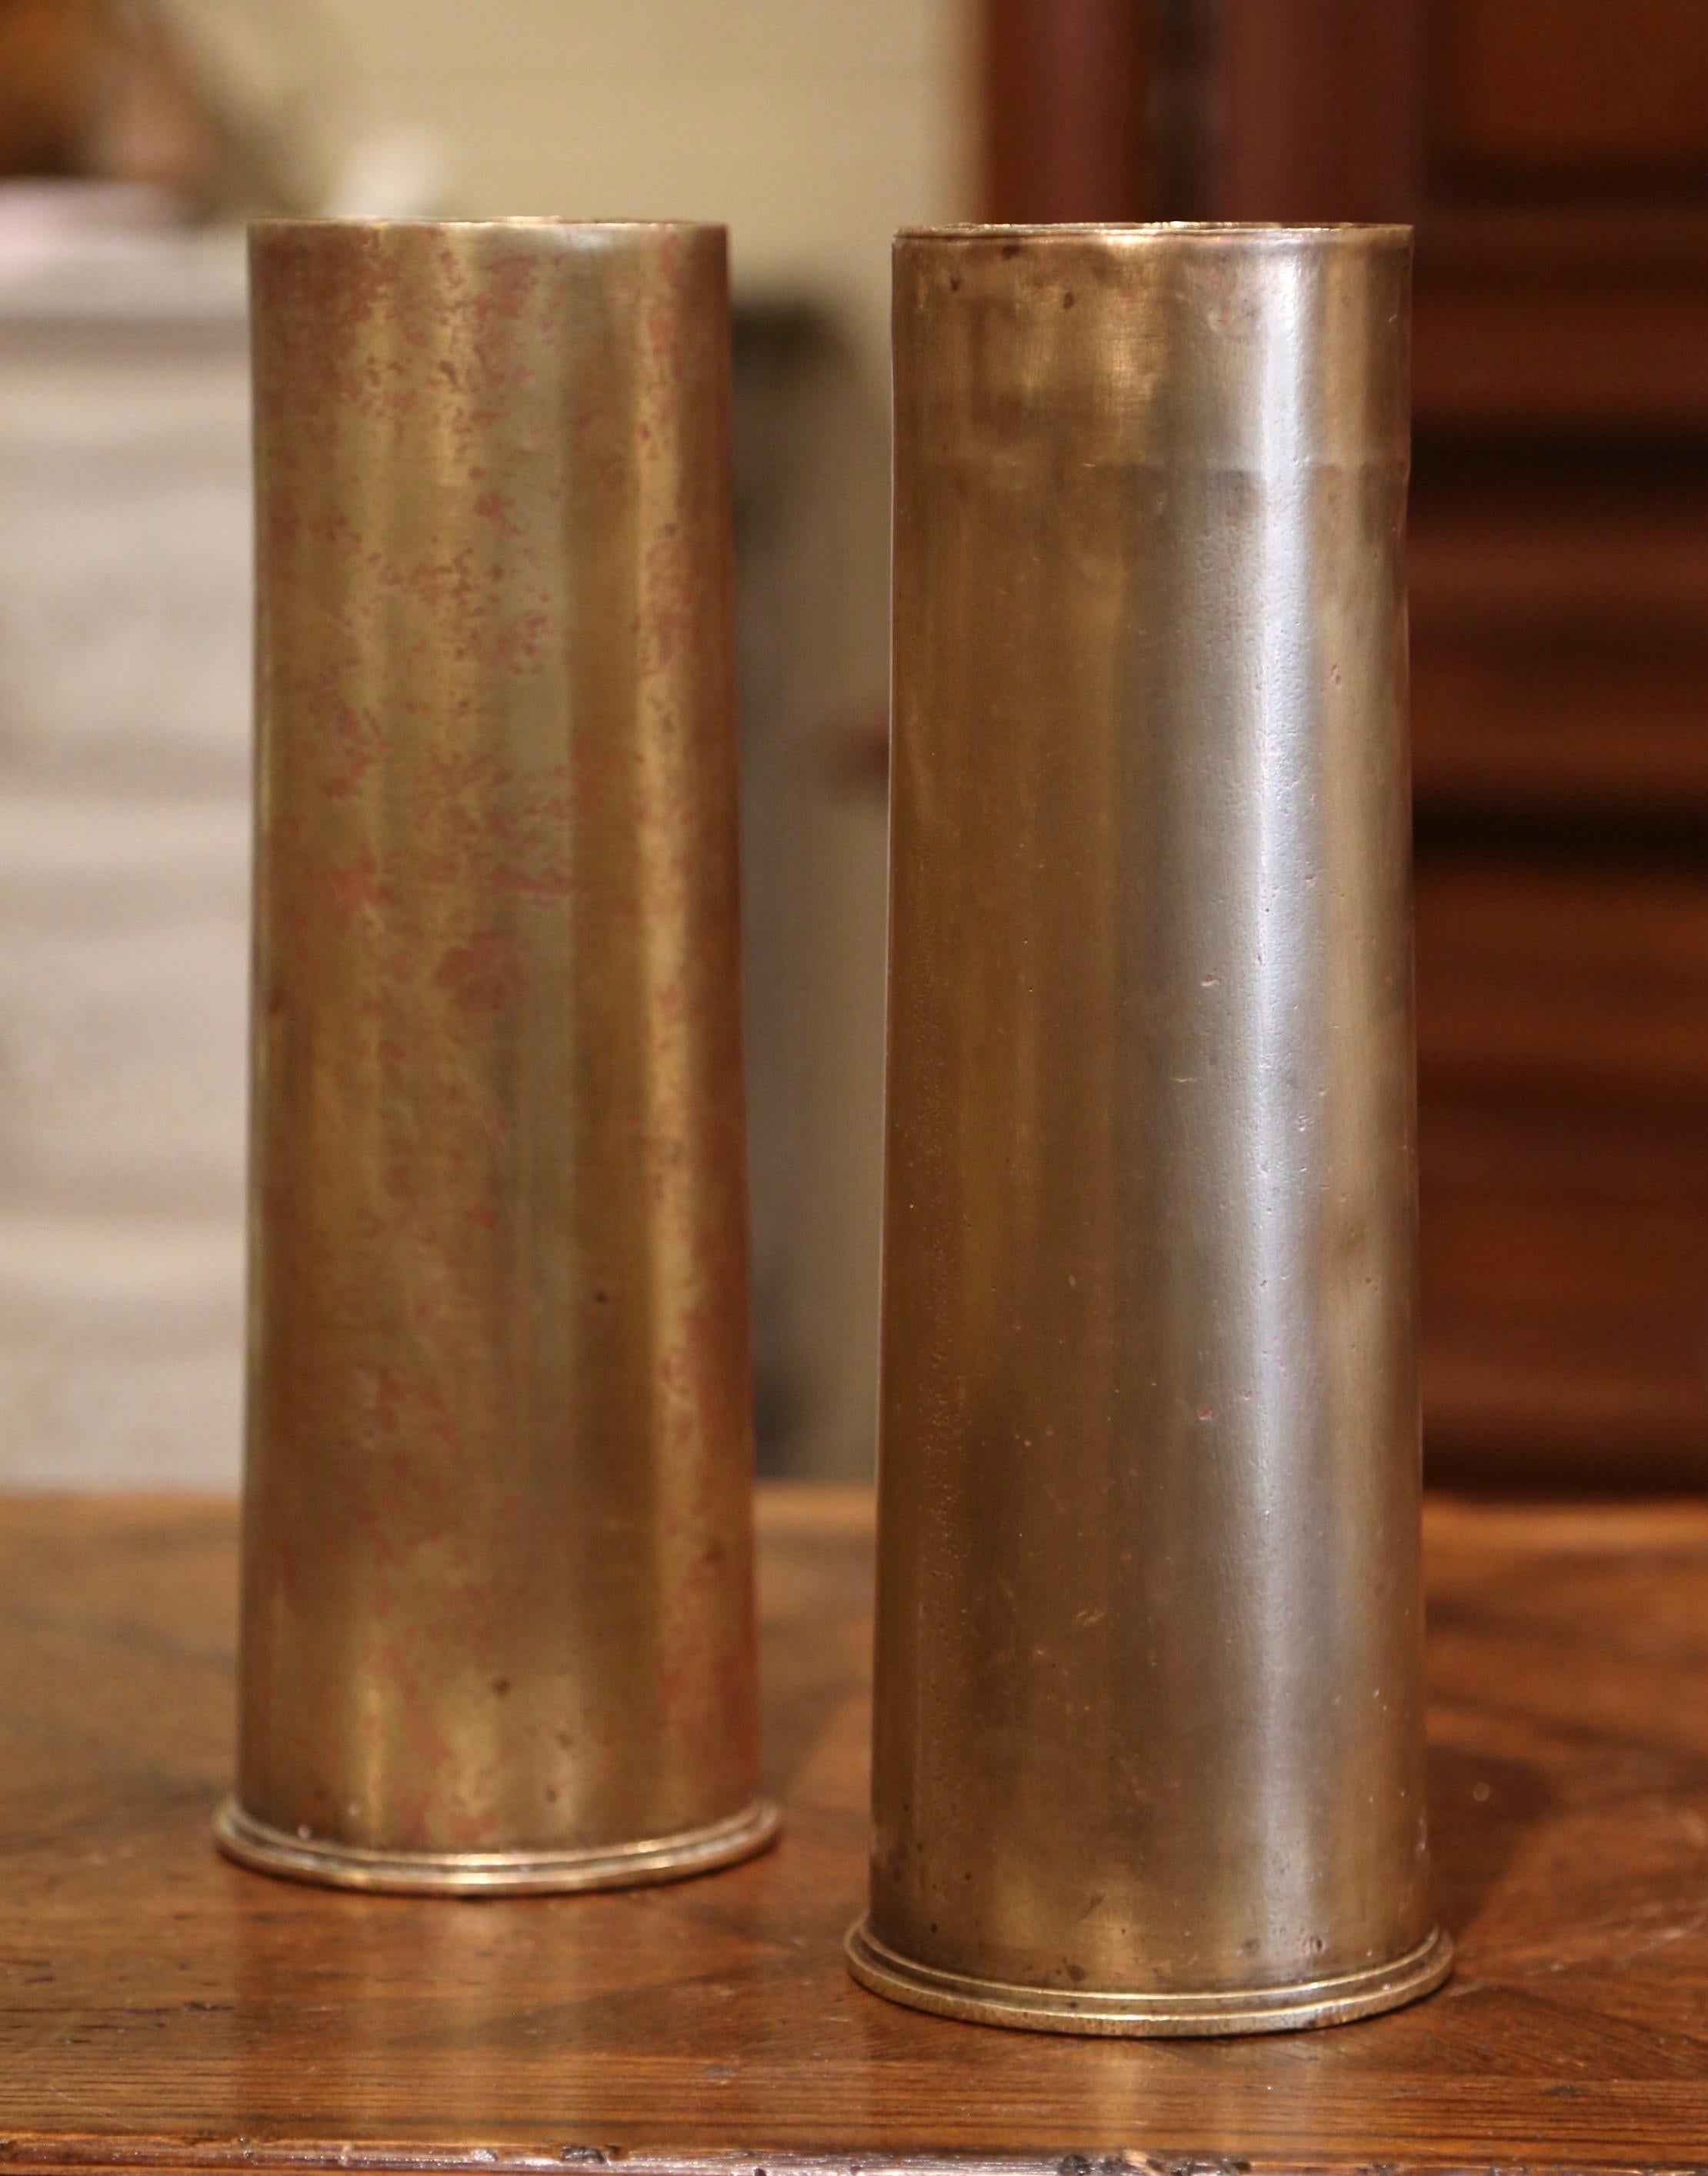 Take a piece of history into your home with these authentic English bombshells from the First World War (WWI 1914-1918). Made of brass, the impressive pieces of artillery are round in shape and dated on the bottom 1915. These one of a kind